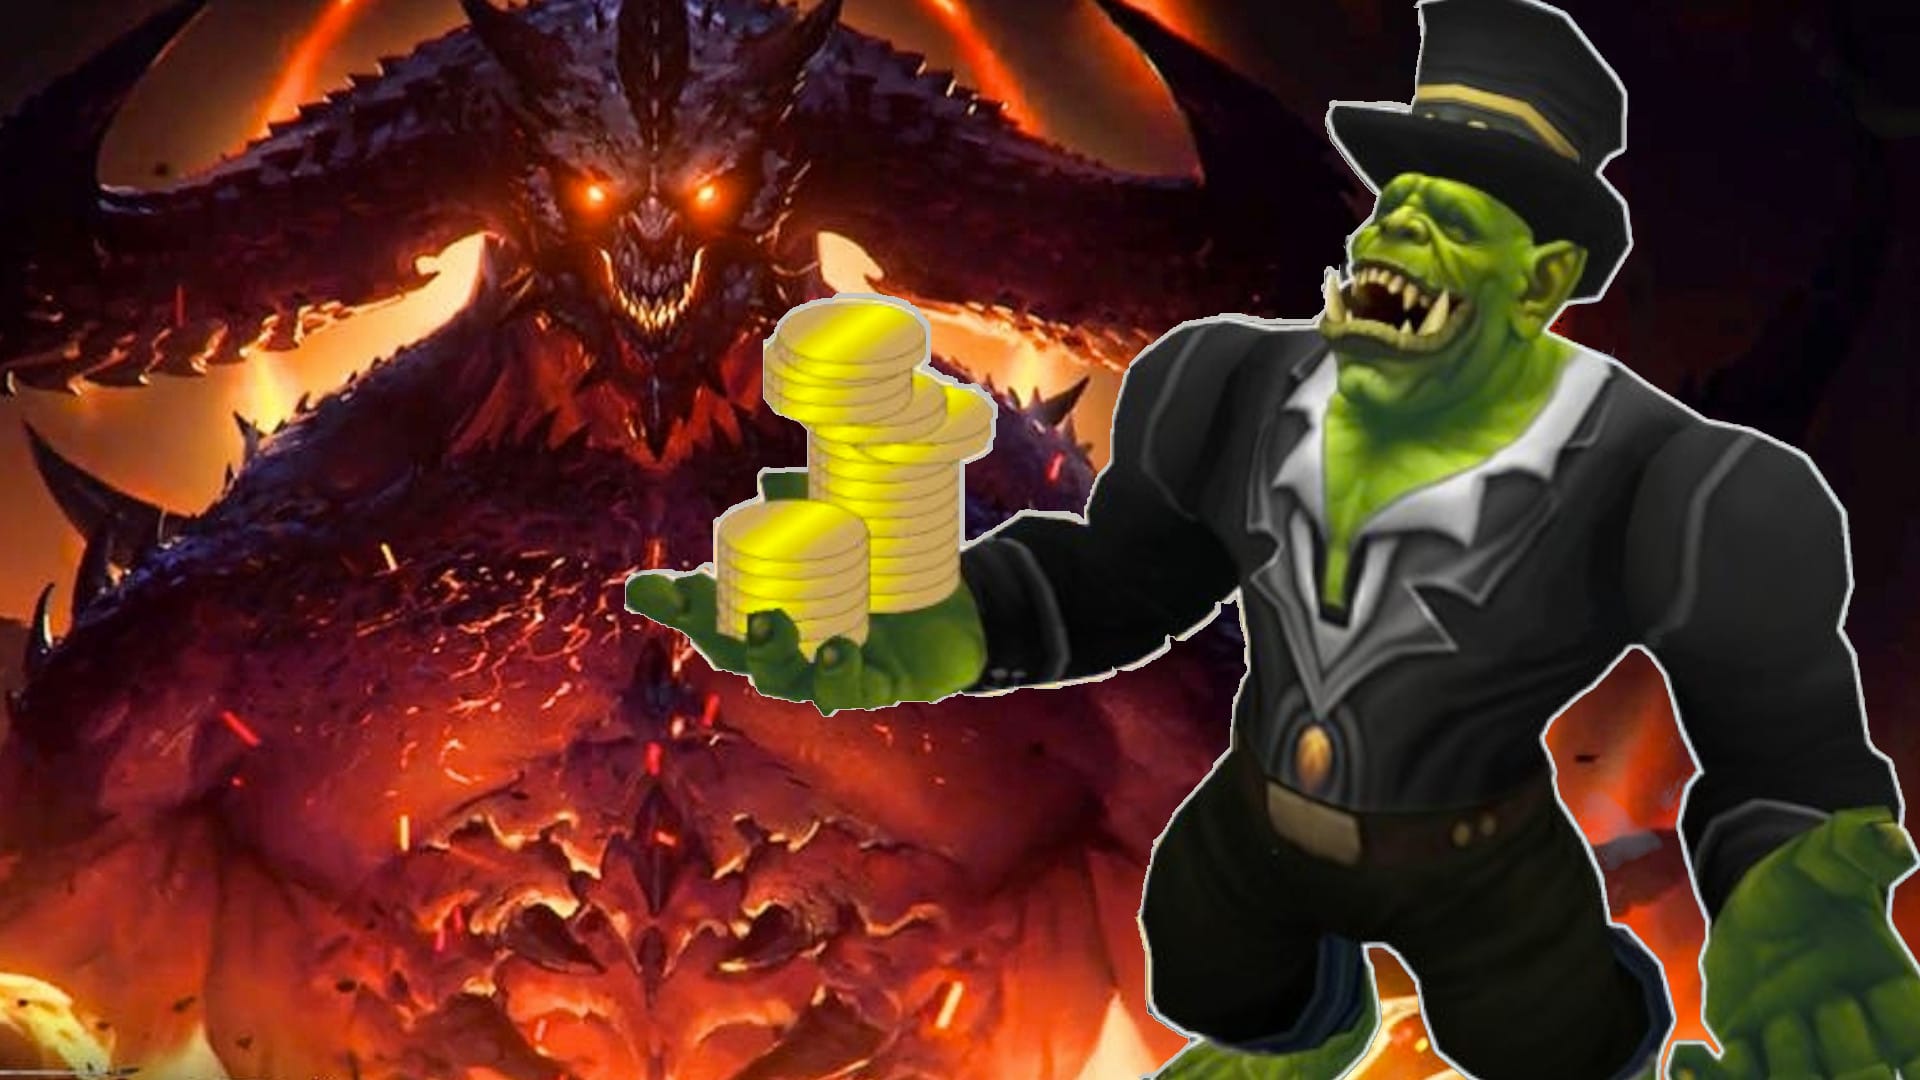 Player sells gold in WoW for 46,000 euros - put everything in Diablo Immortal to destroy Pay2Win whales